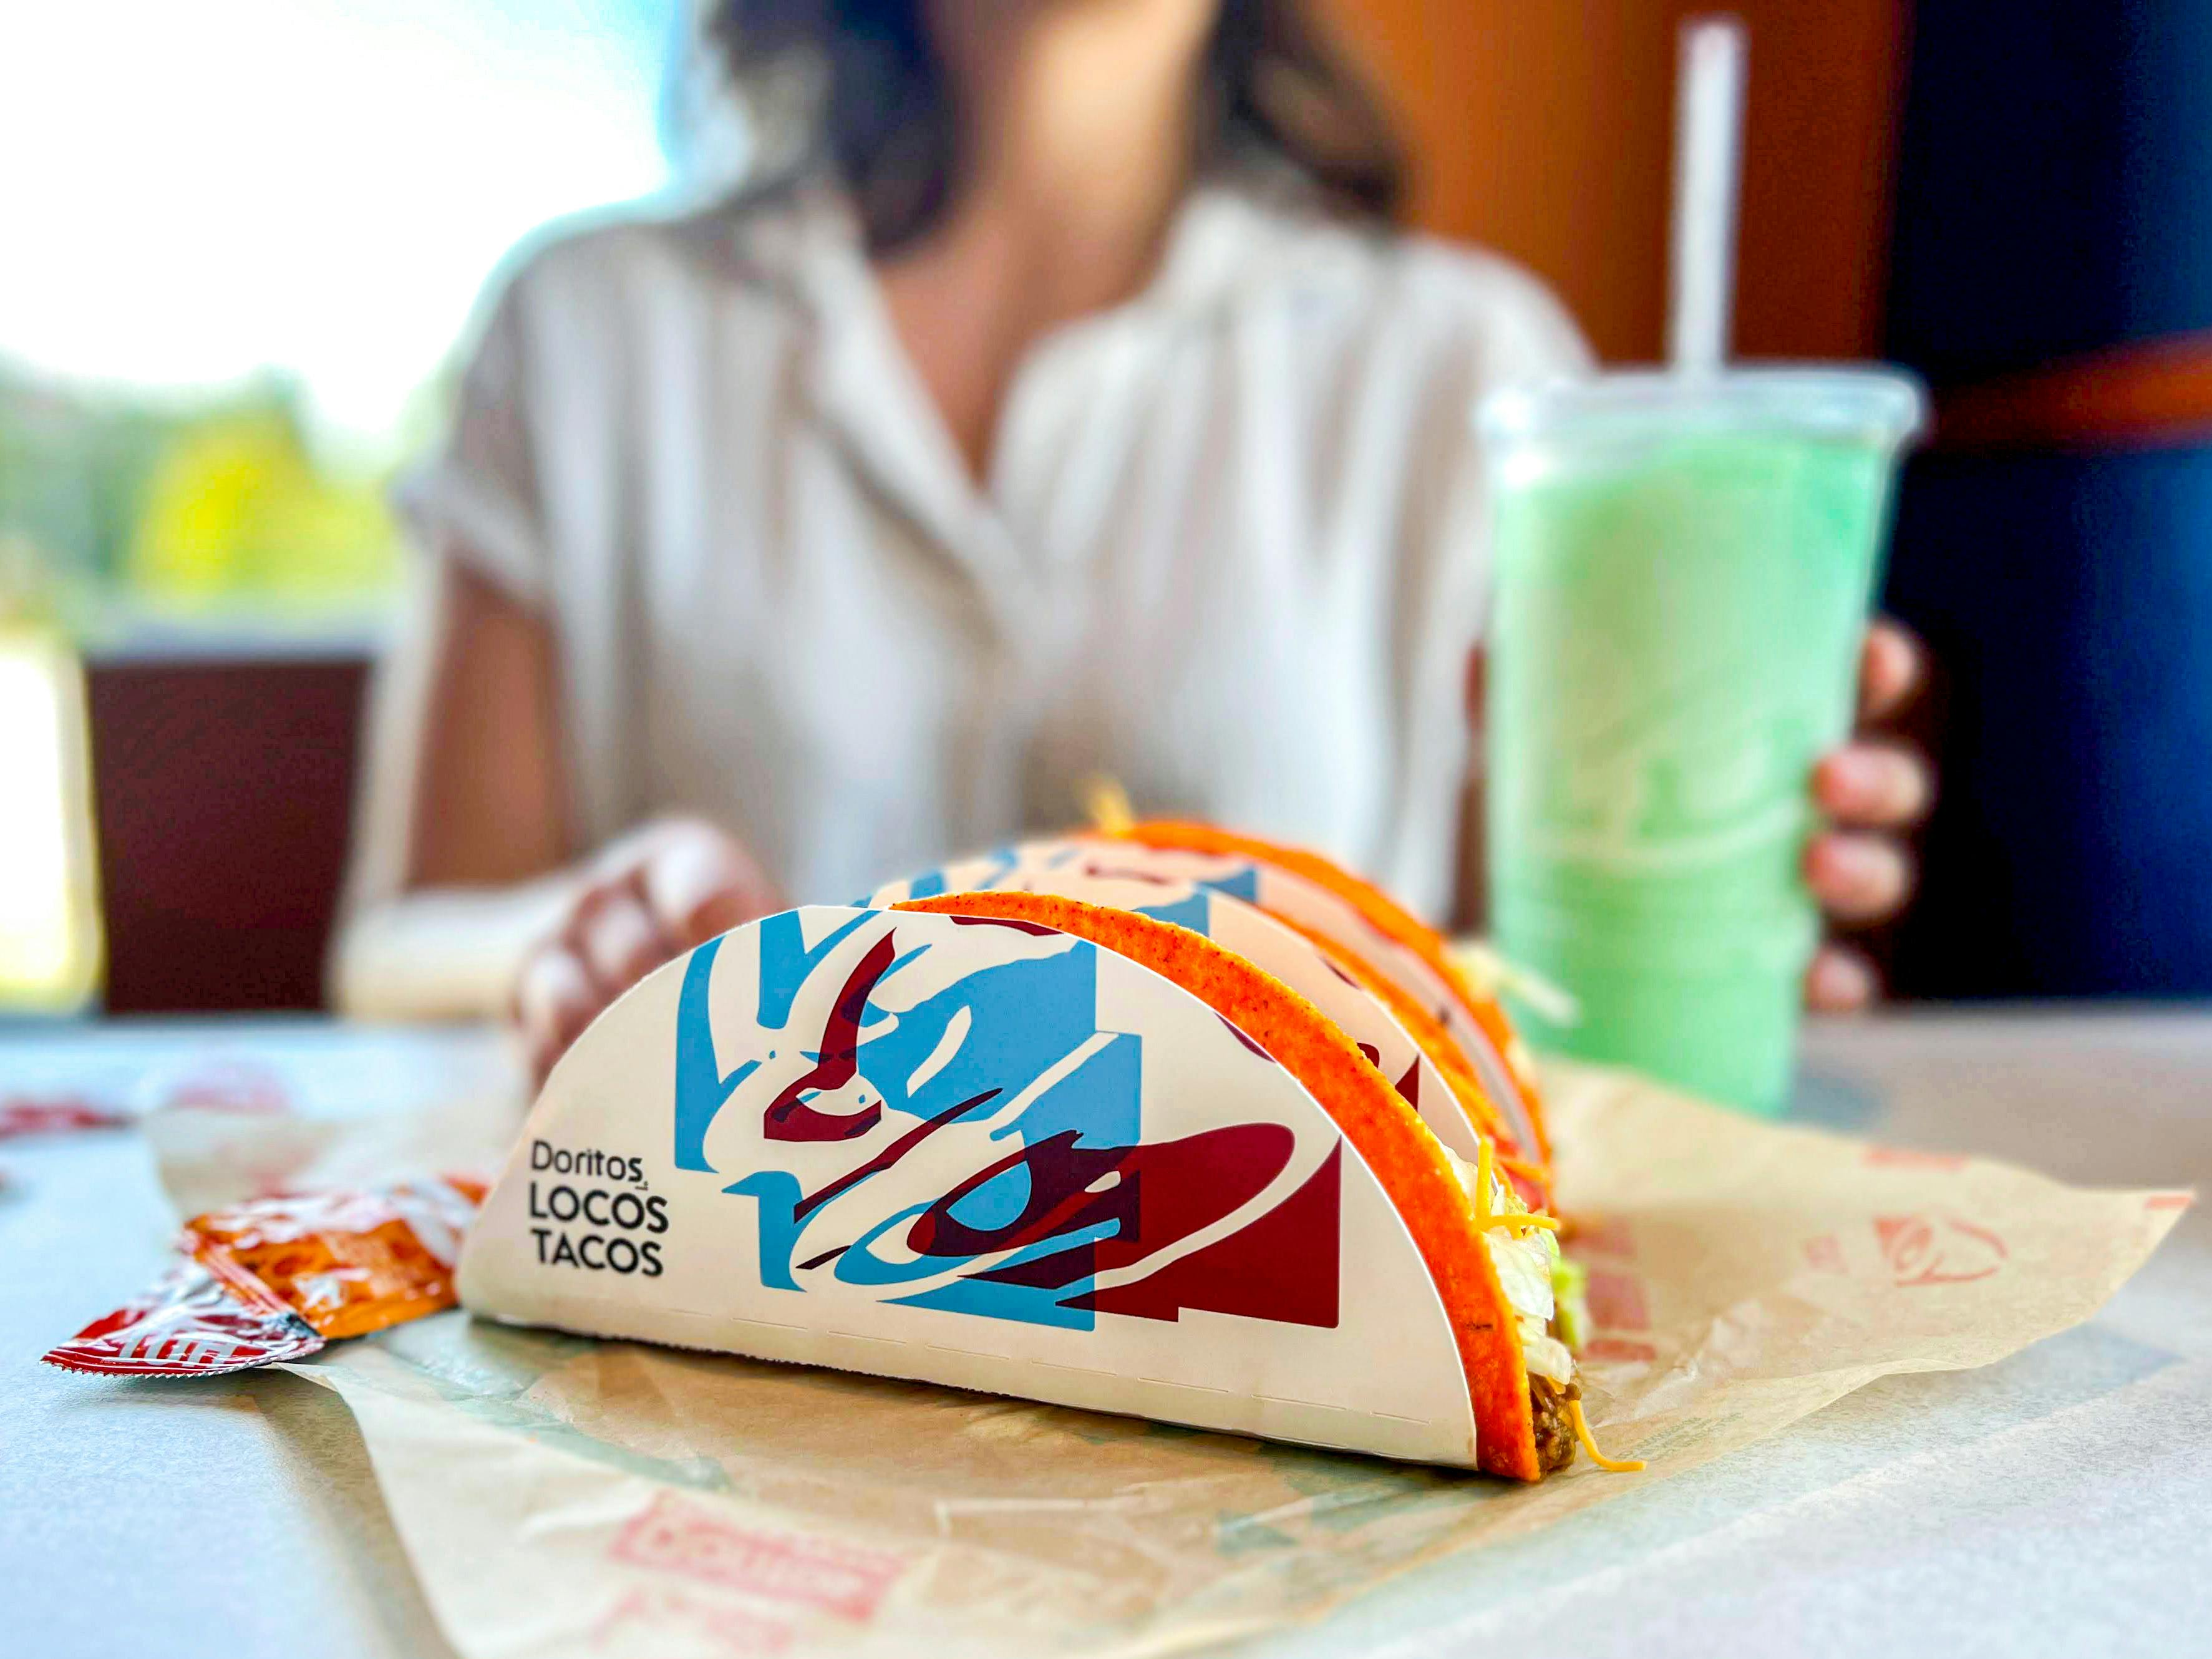 Today is National Taco Day: Deals from Taco Bell, Qdoba and More